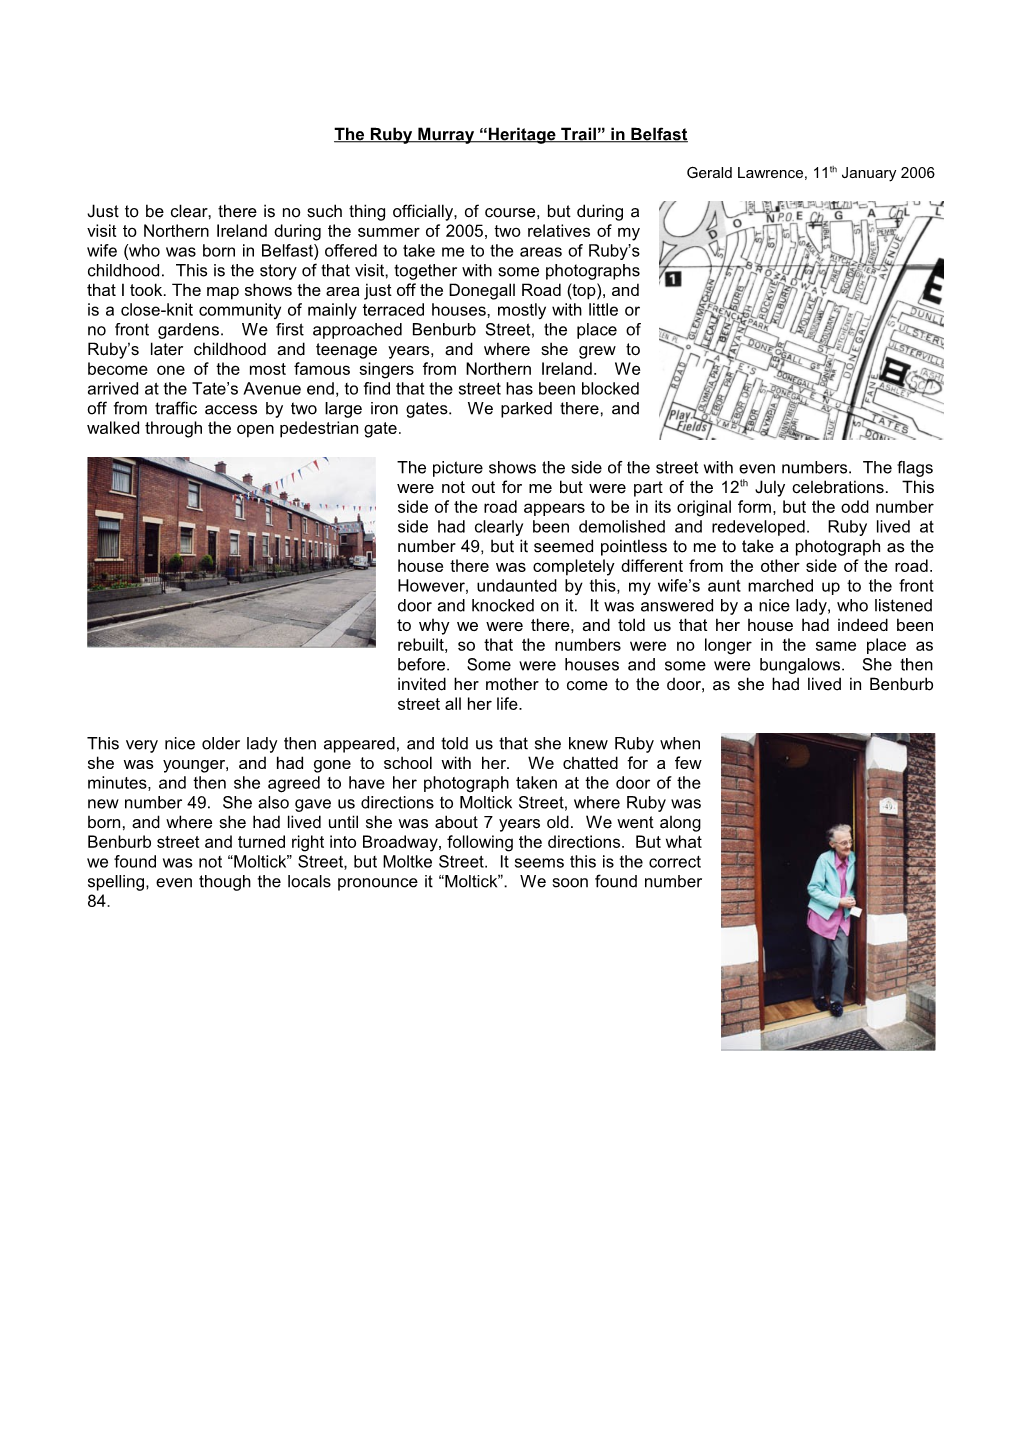 The Ruby Murray Heritage Trail in Belfast